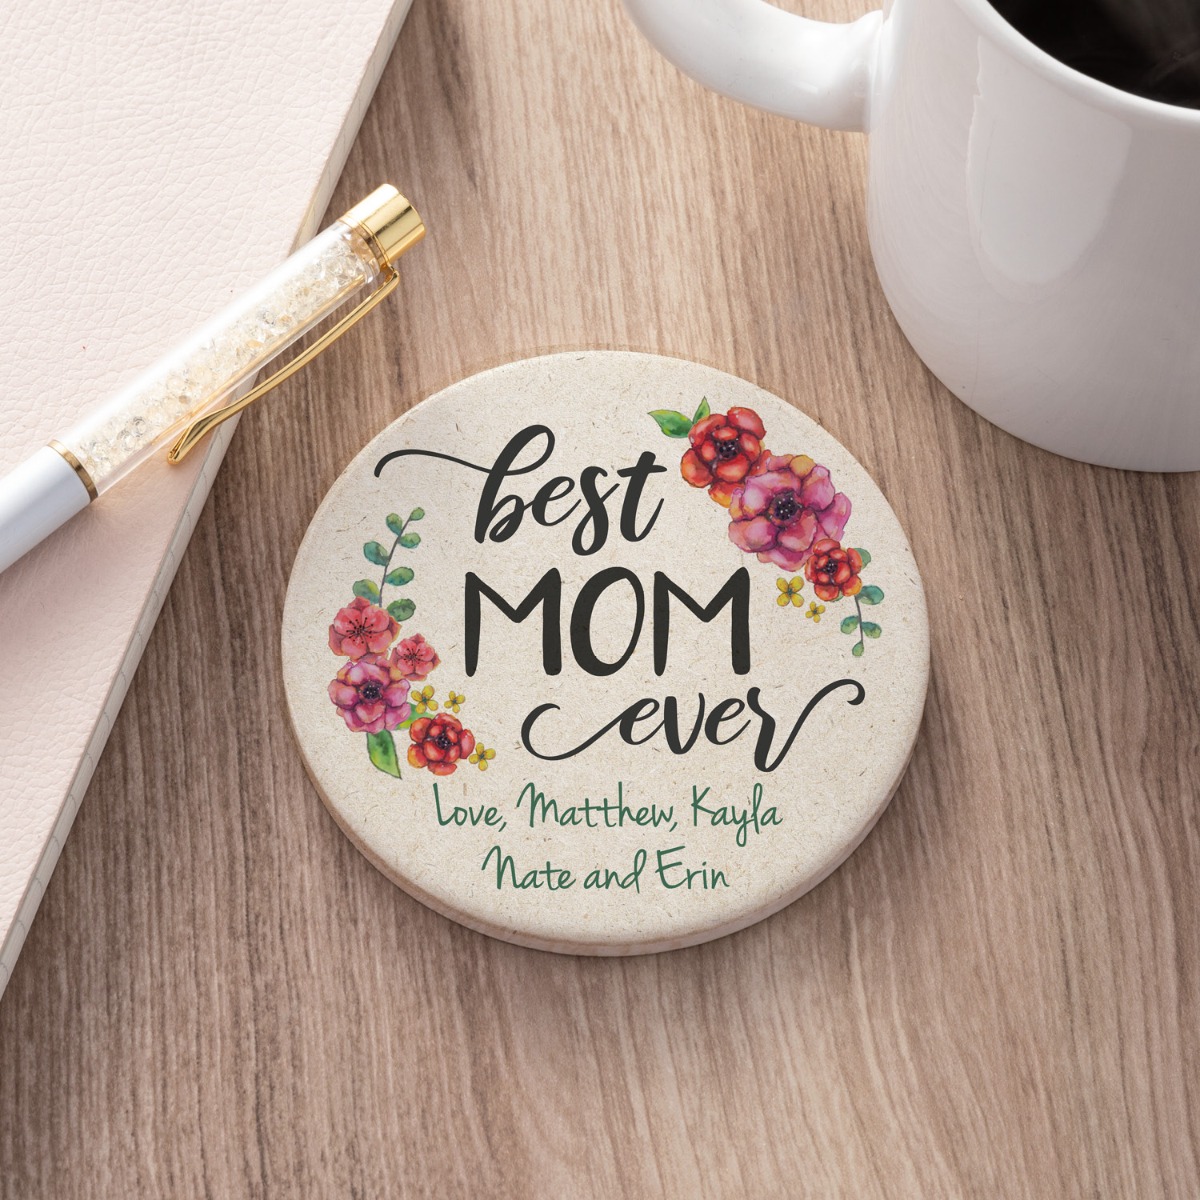 Best Mom Ever Personalized Round Desk Coaster